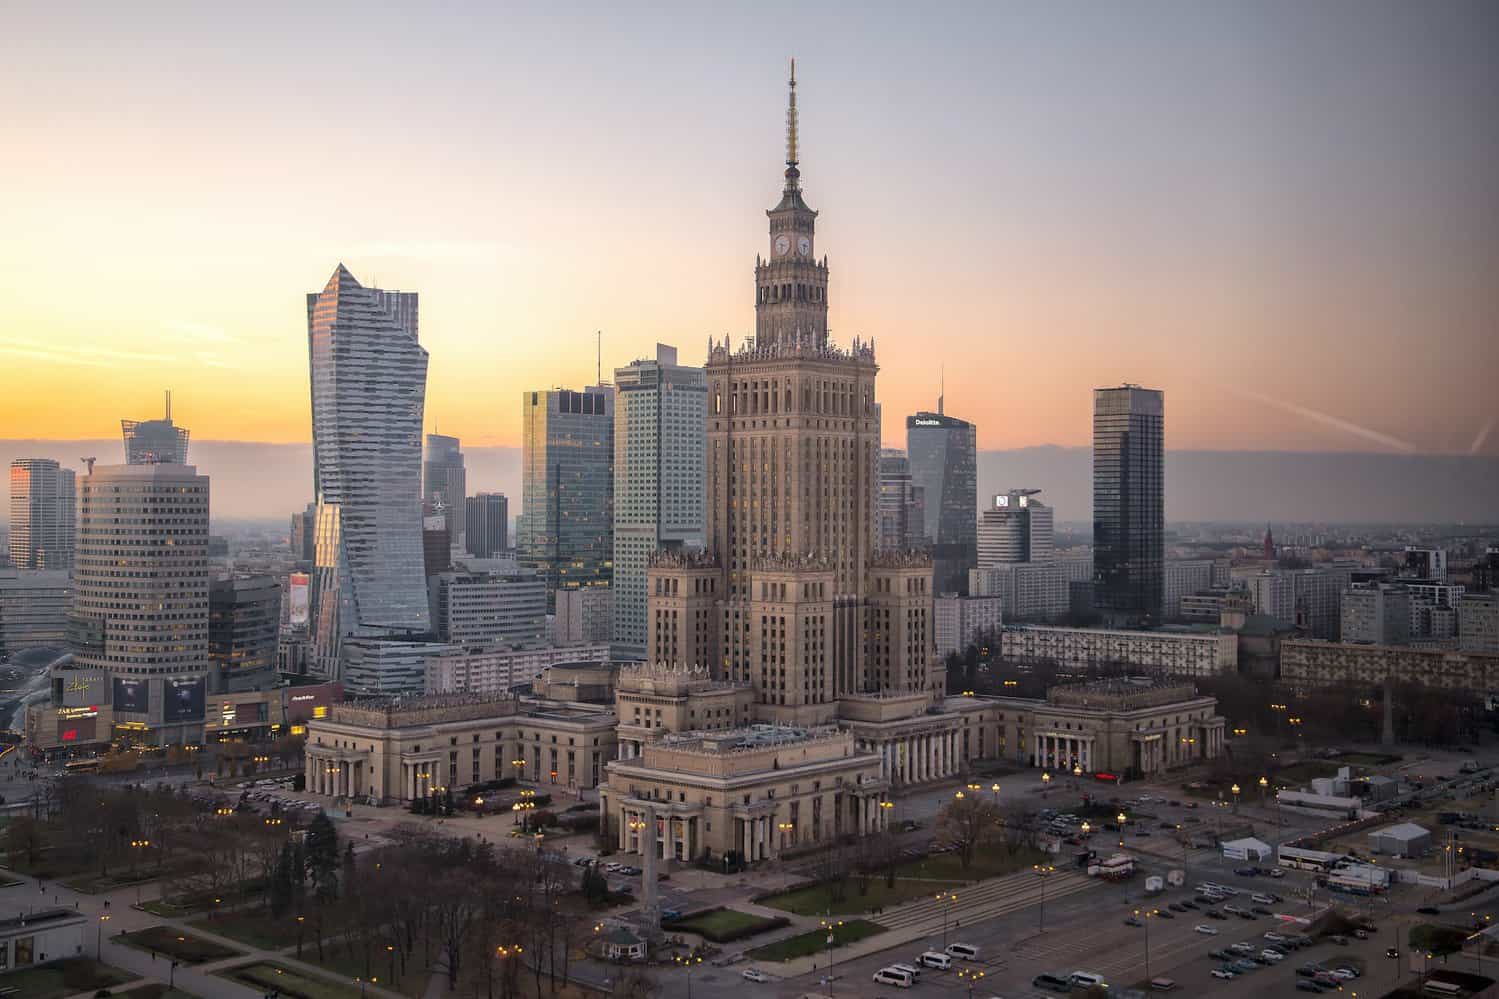 Warsaw Most International Countries and Cities in Europe